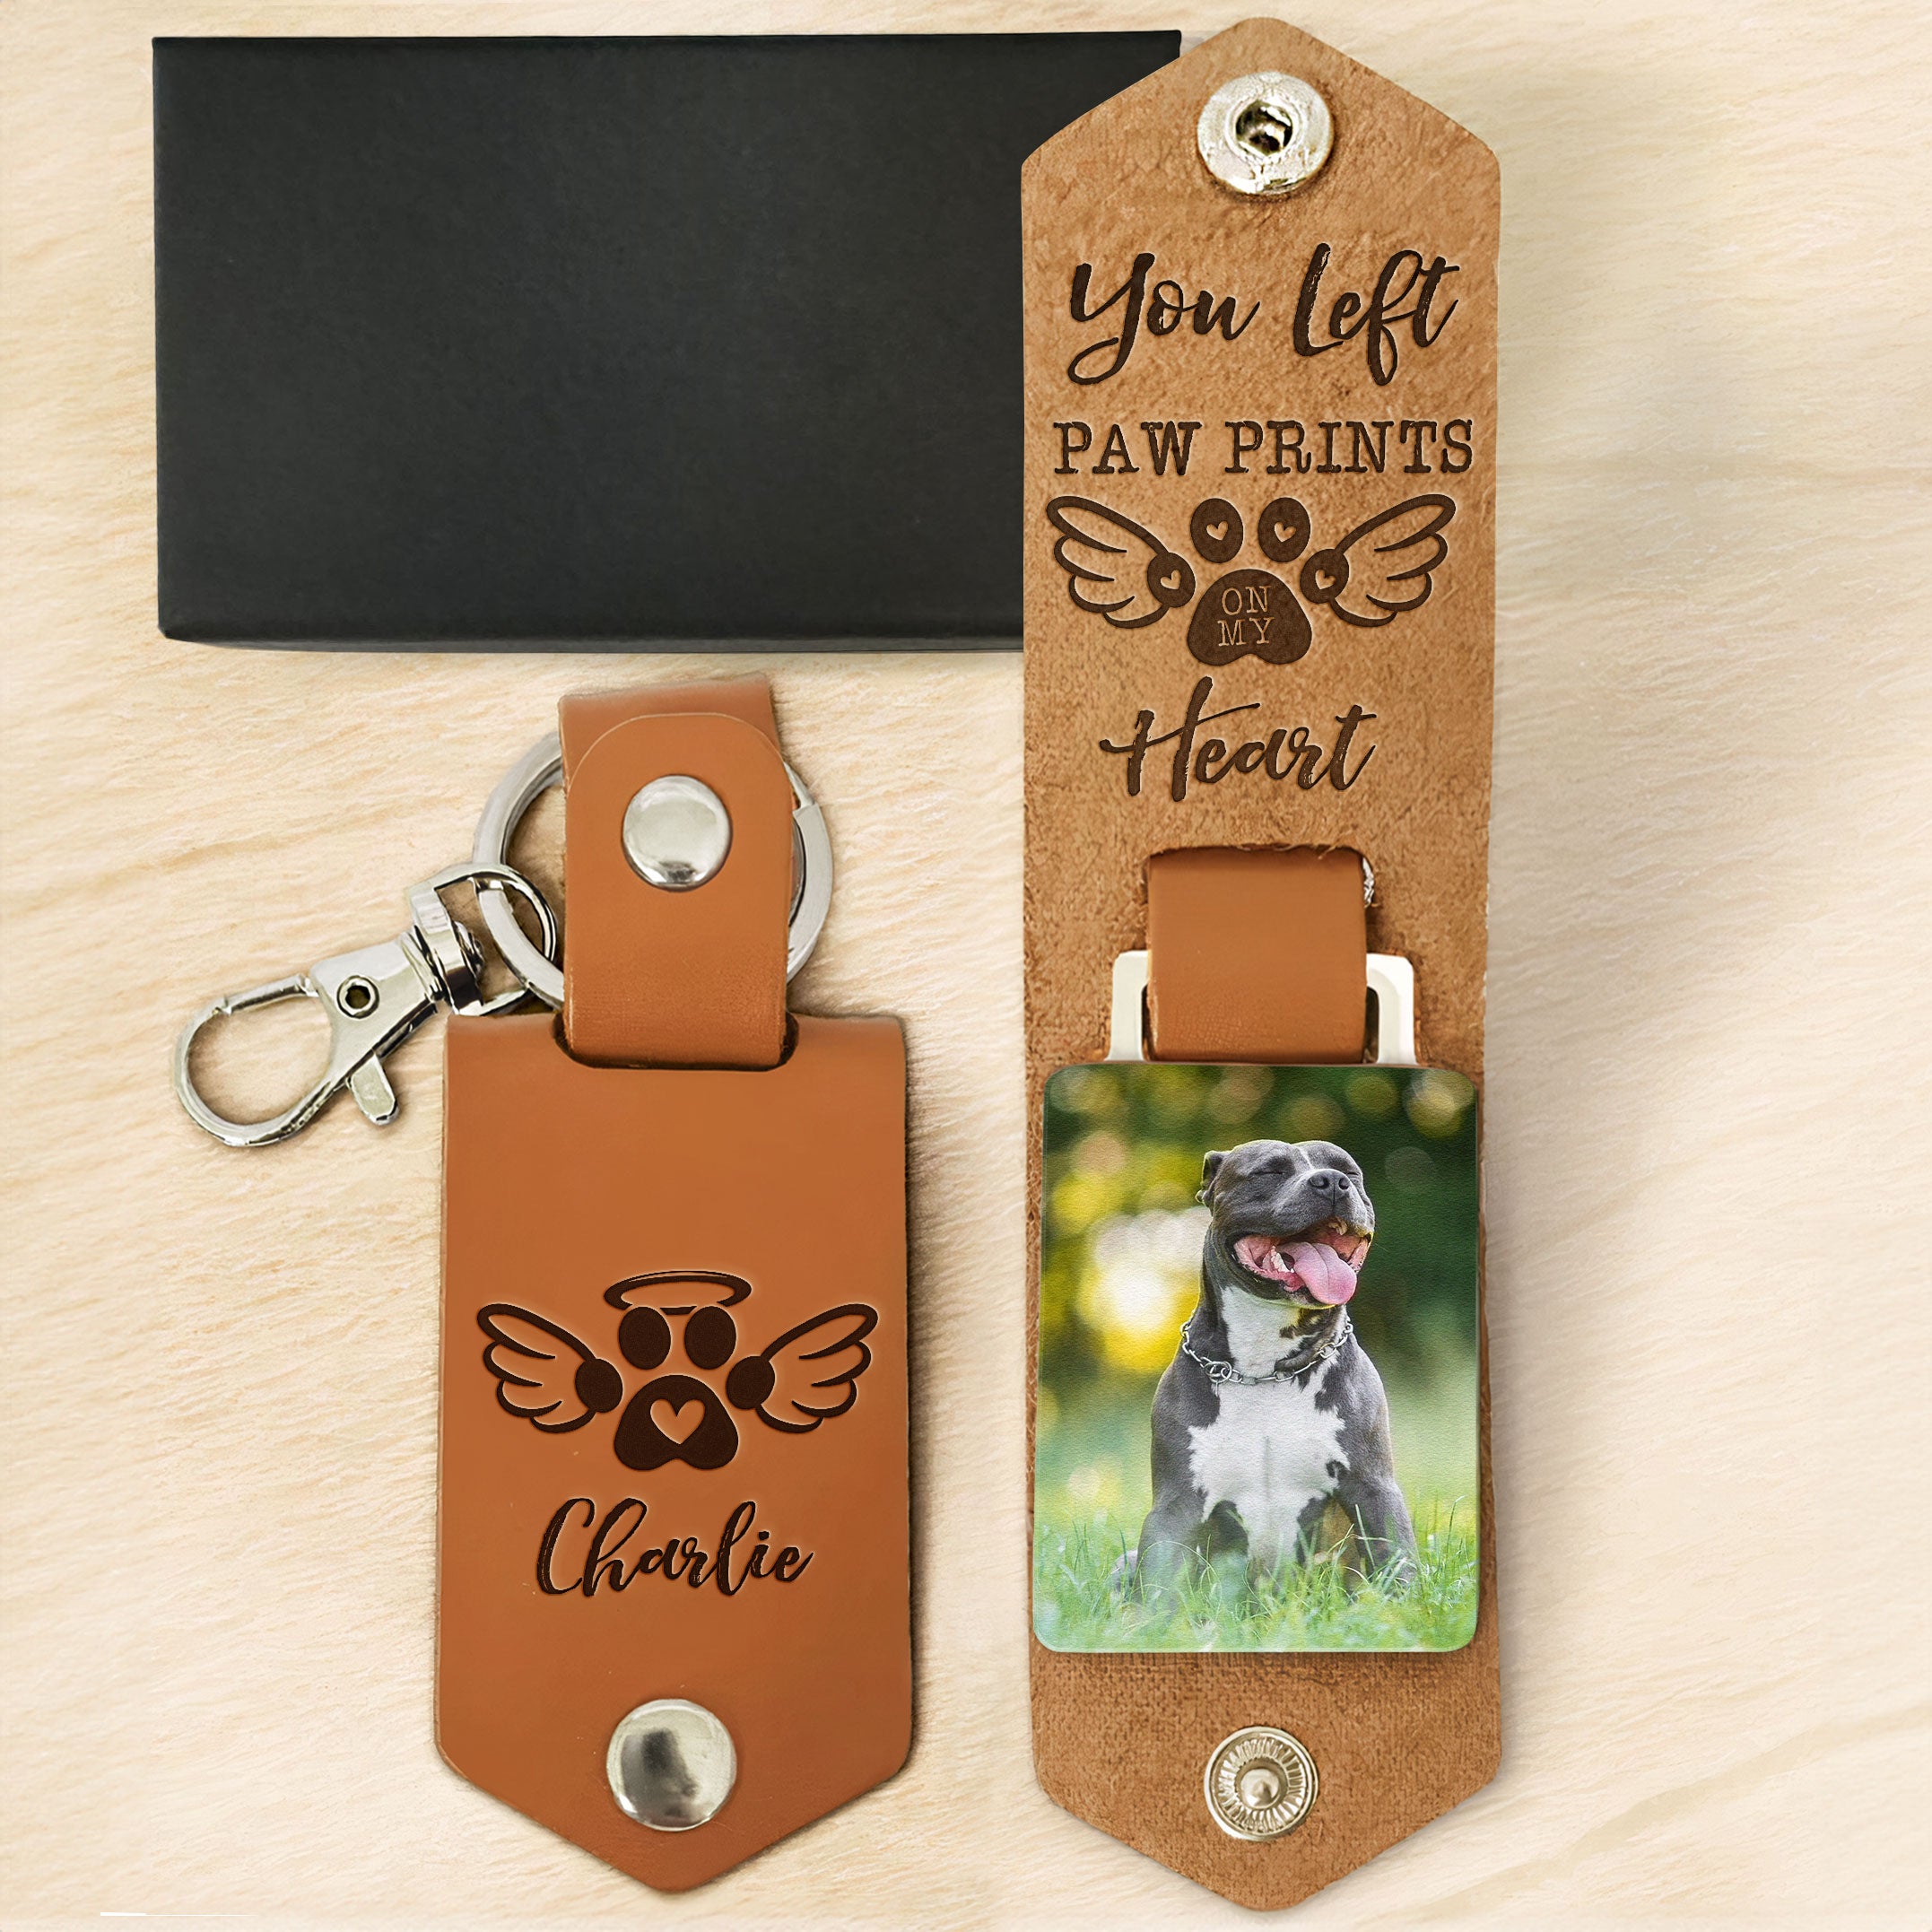 You Left Paw Prints - Personalized Leather Photo Keychain